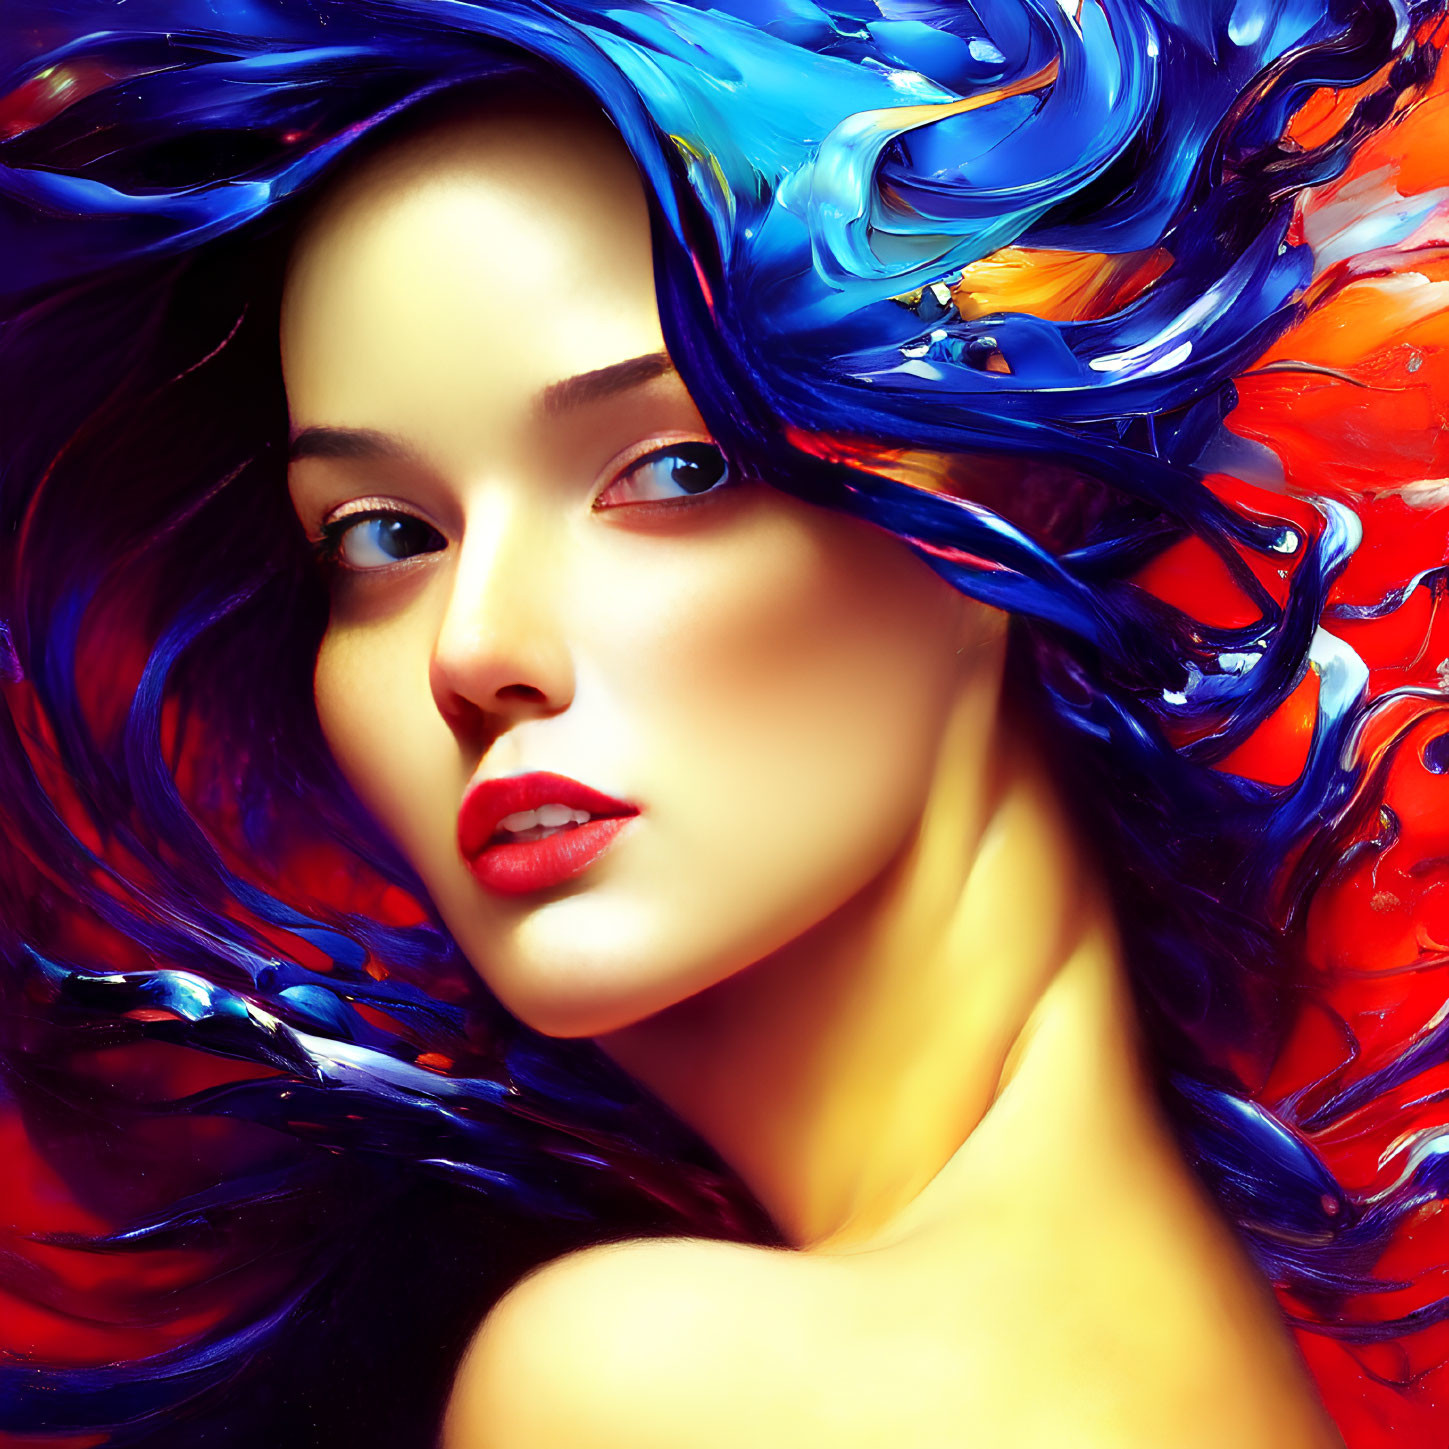 Colorful Portrait of Woman with Vibrant Blue and Red Hair